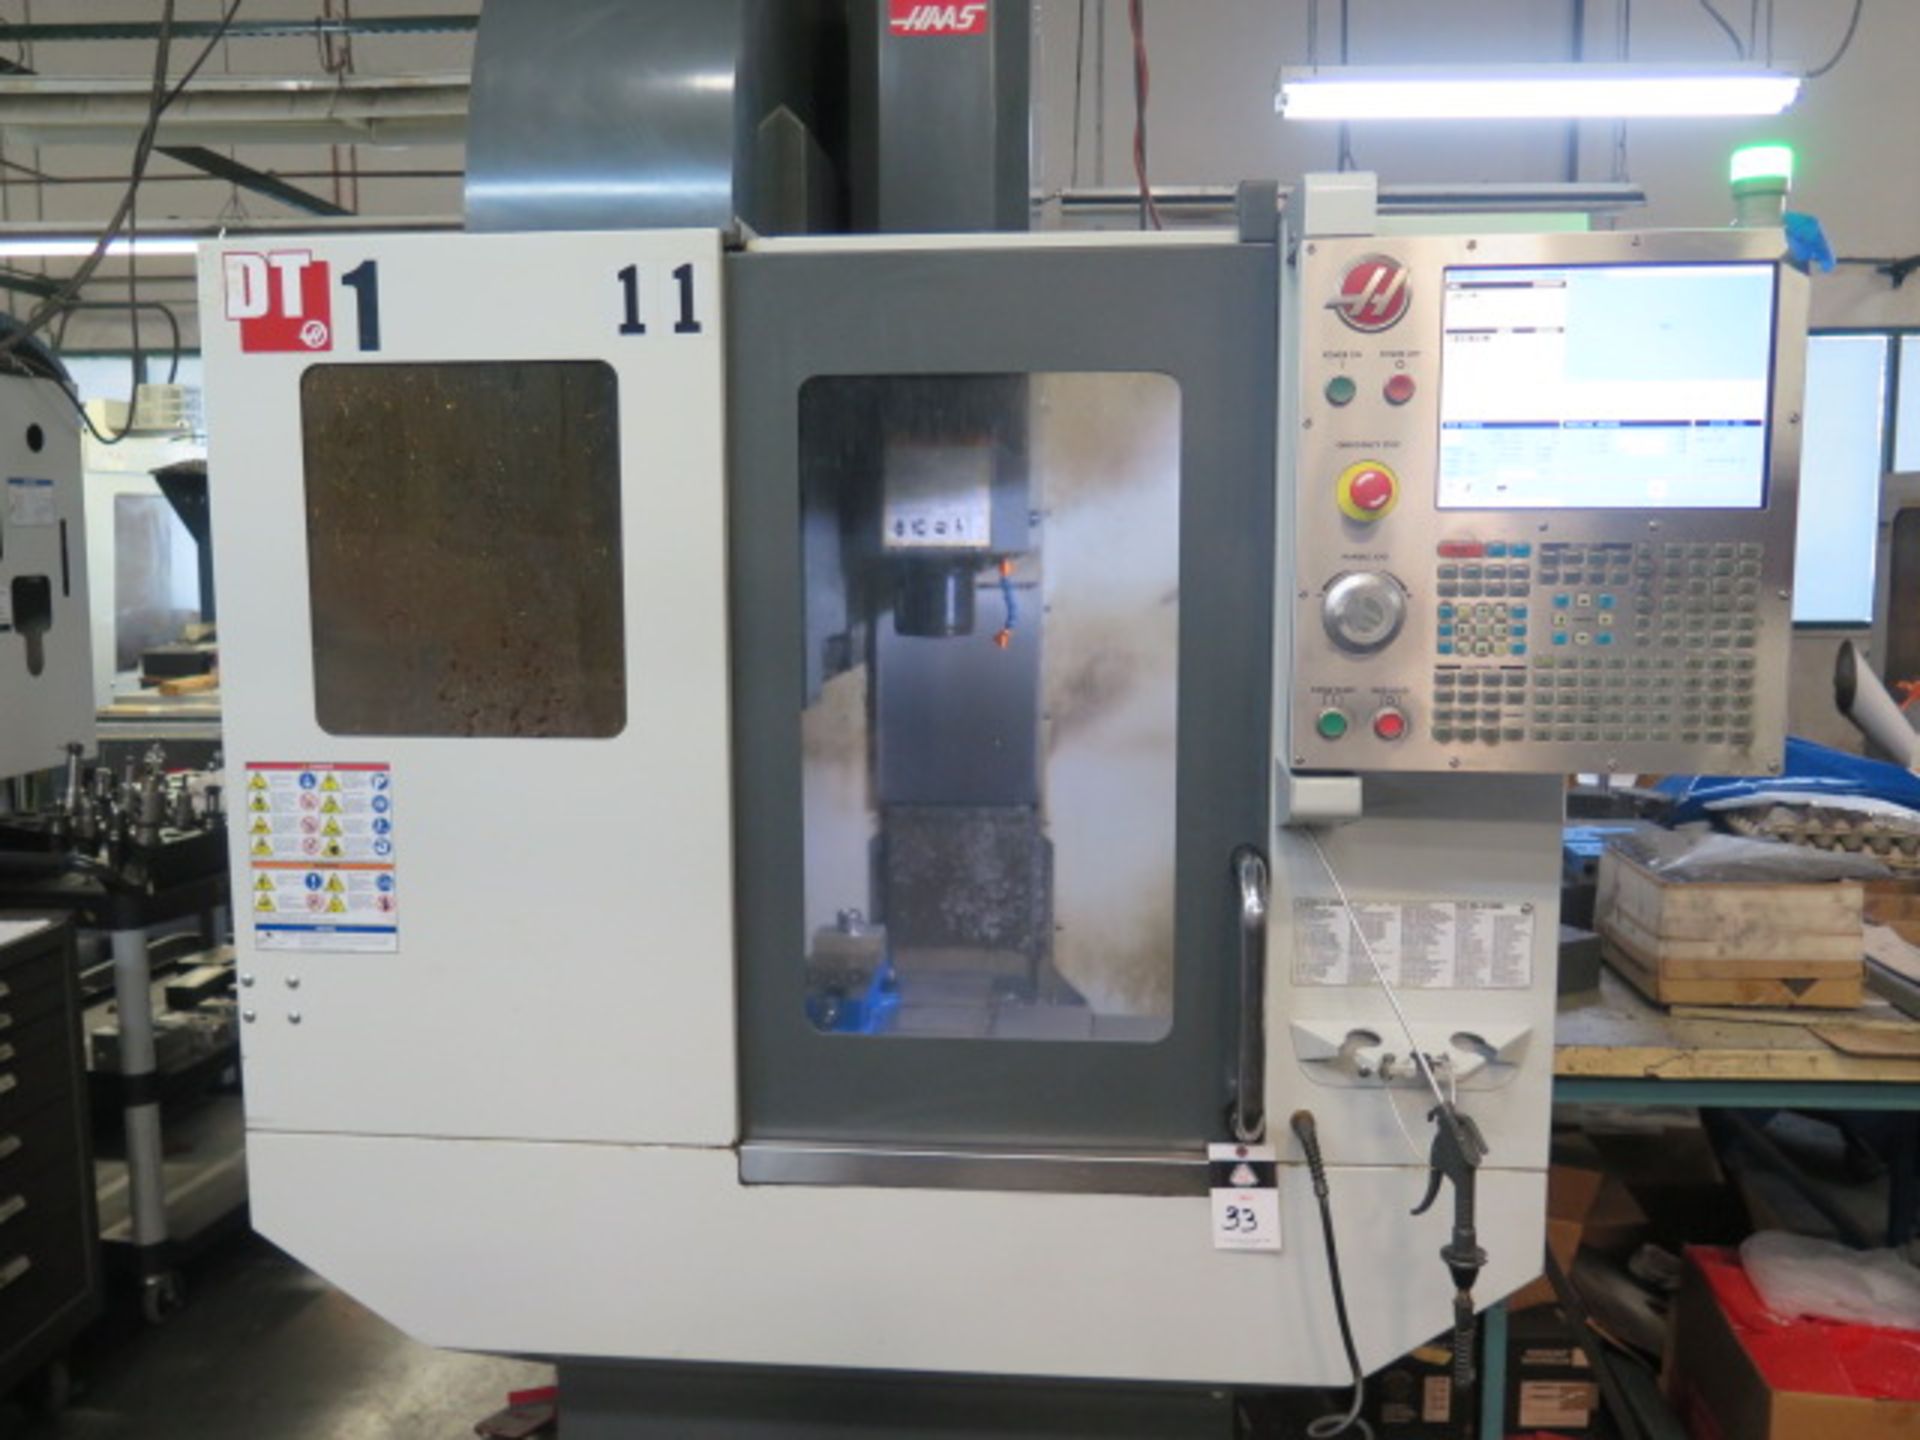 DEC/2014 Haas DT-1 CNC VMC s/n 1118934 w/ Haas Controls, 20-Station ATC, BT-30, SOLD AS IS